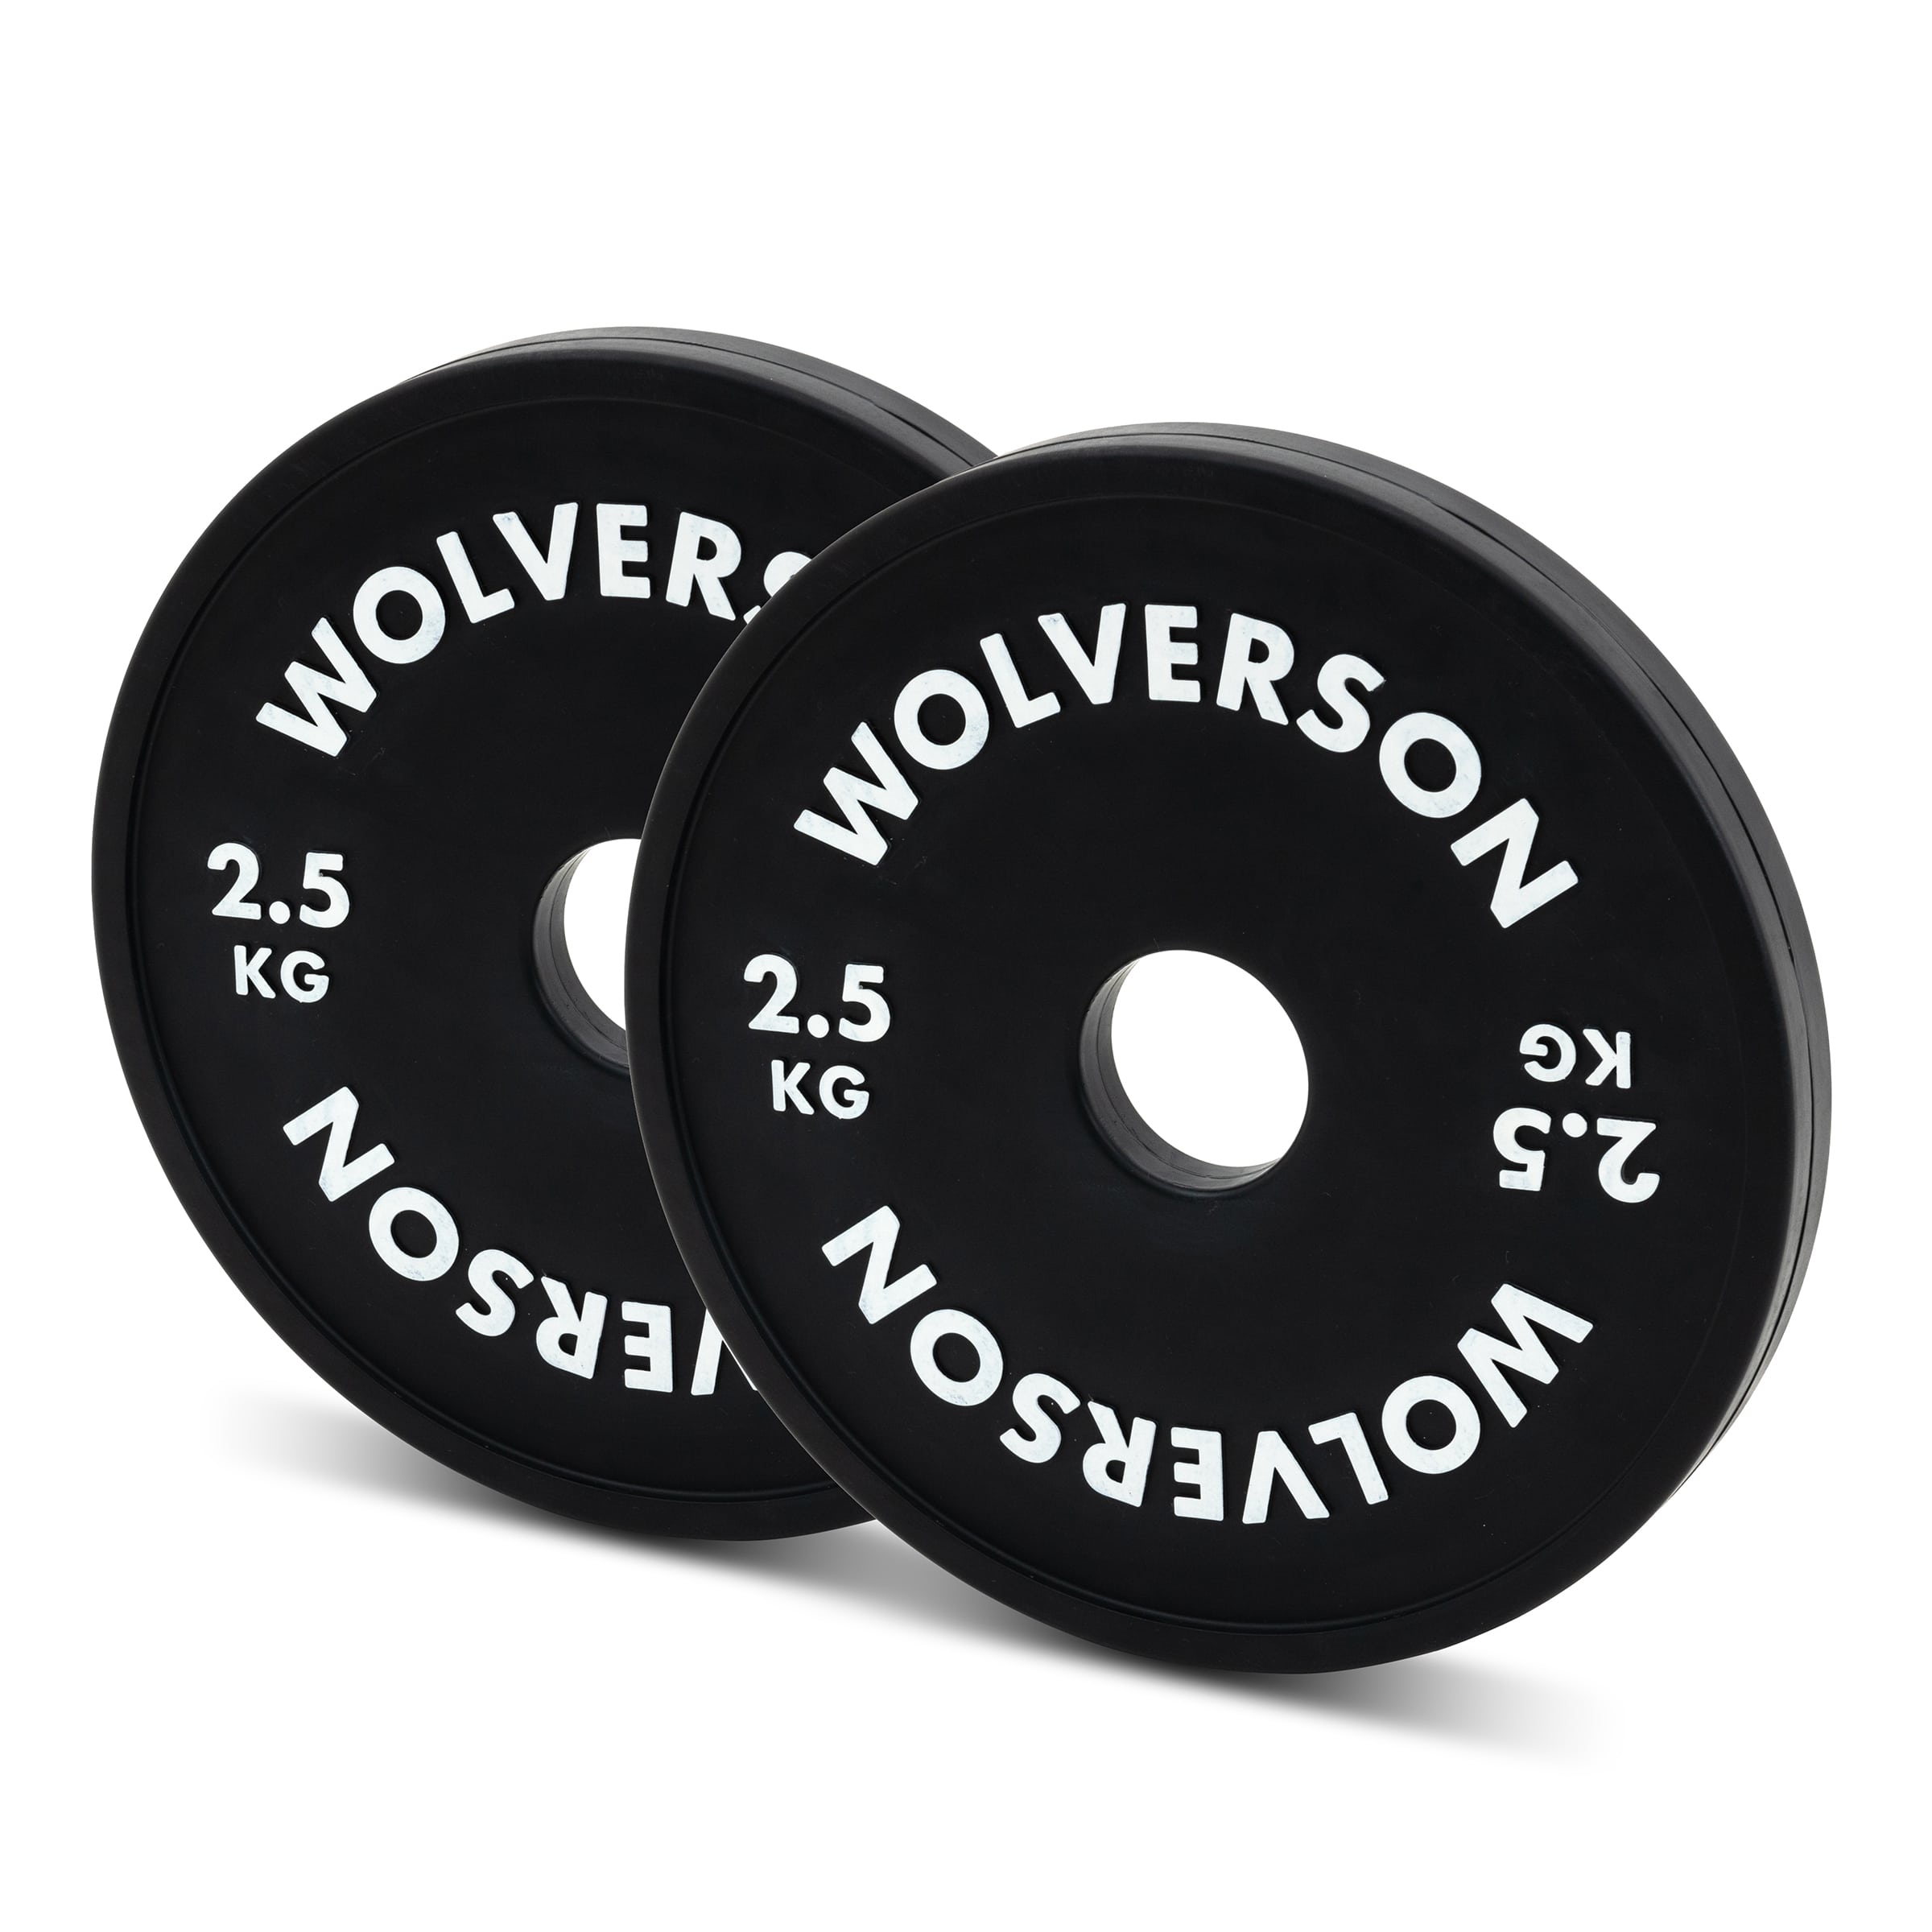 Wolverson Black Fractional Plates